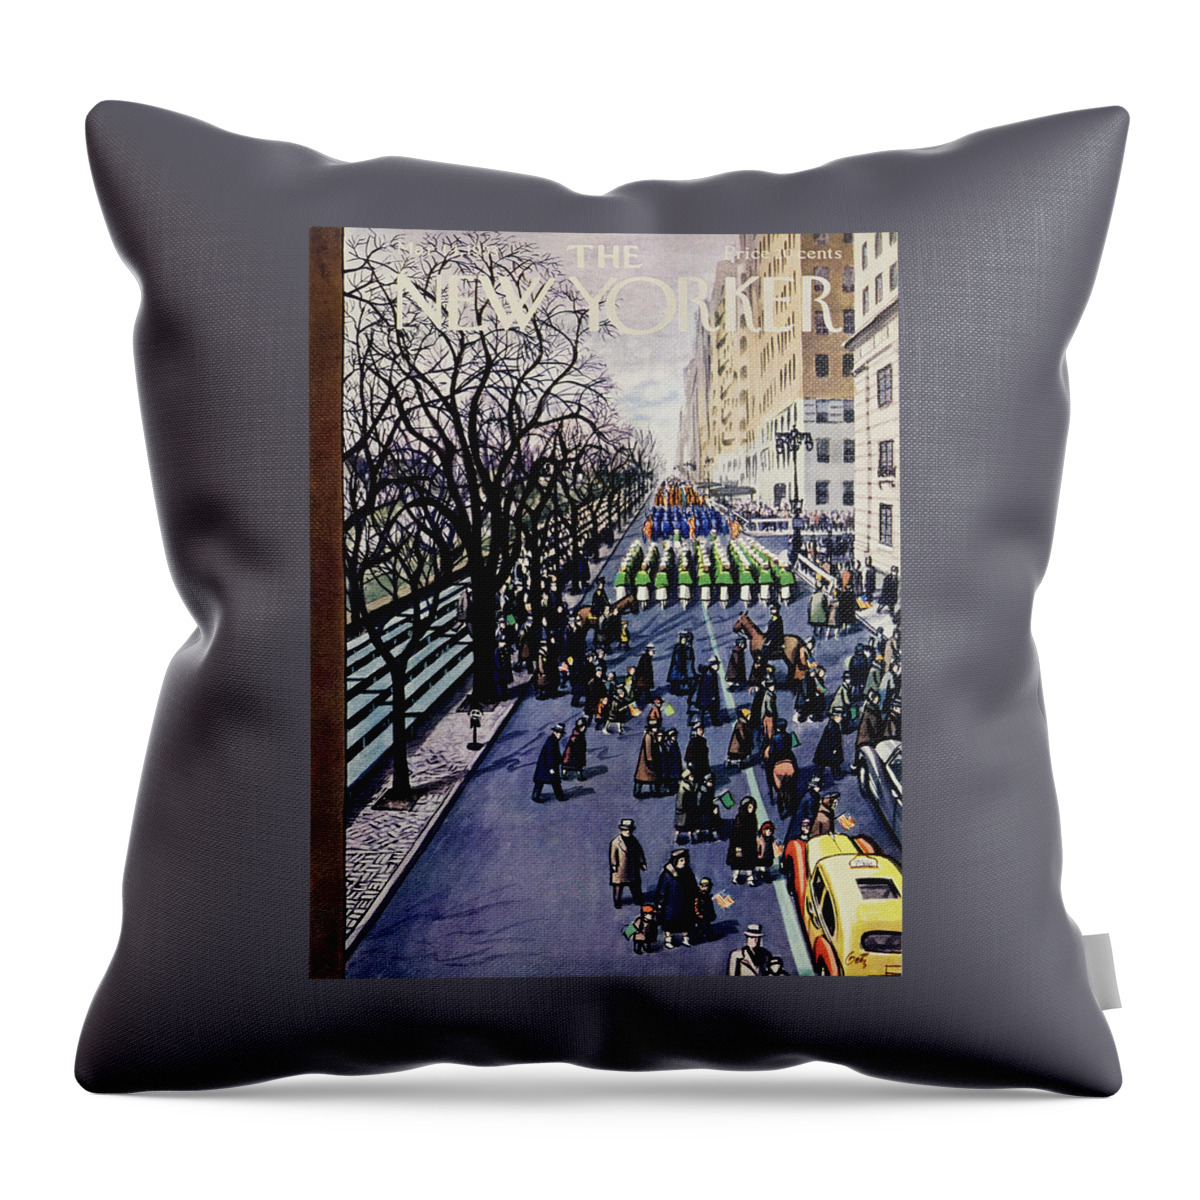 New Yorker March 14 1953 Throw Pillow